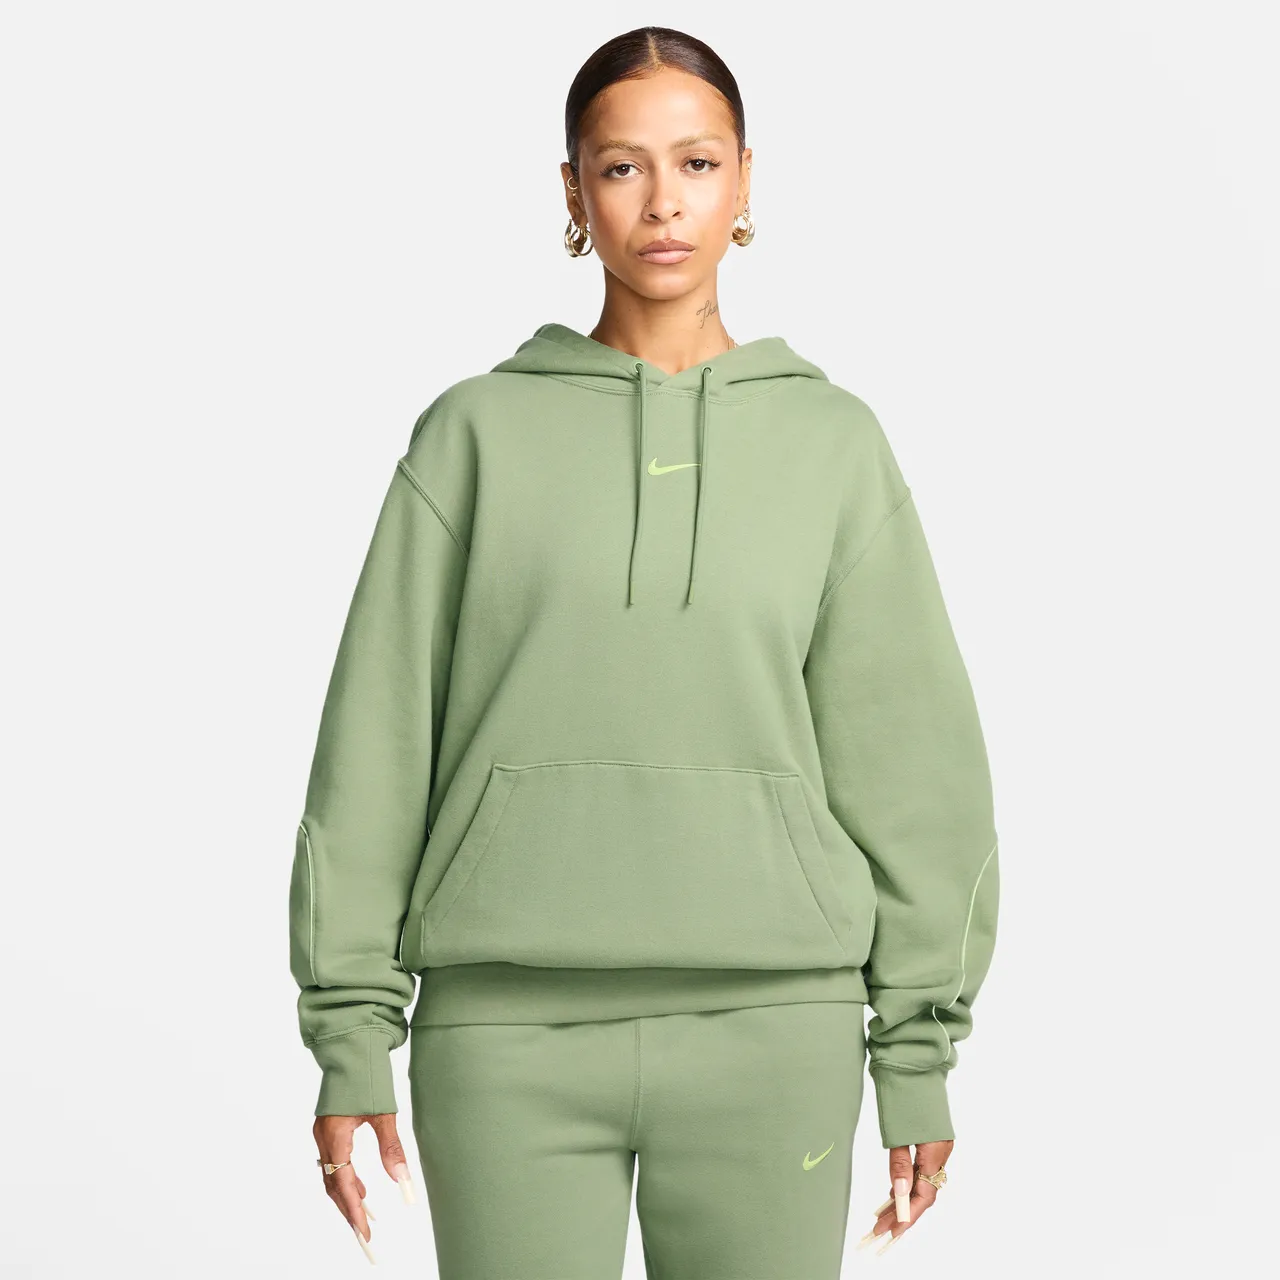 NOCTA Hoodie - Green - Polyester